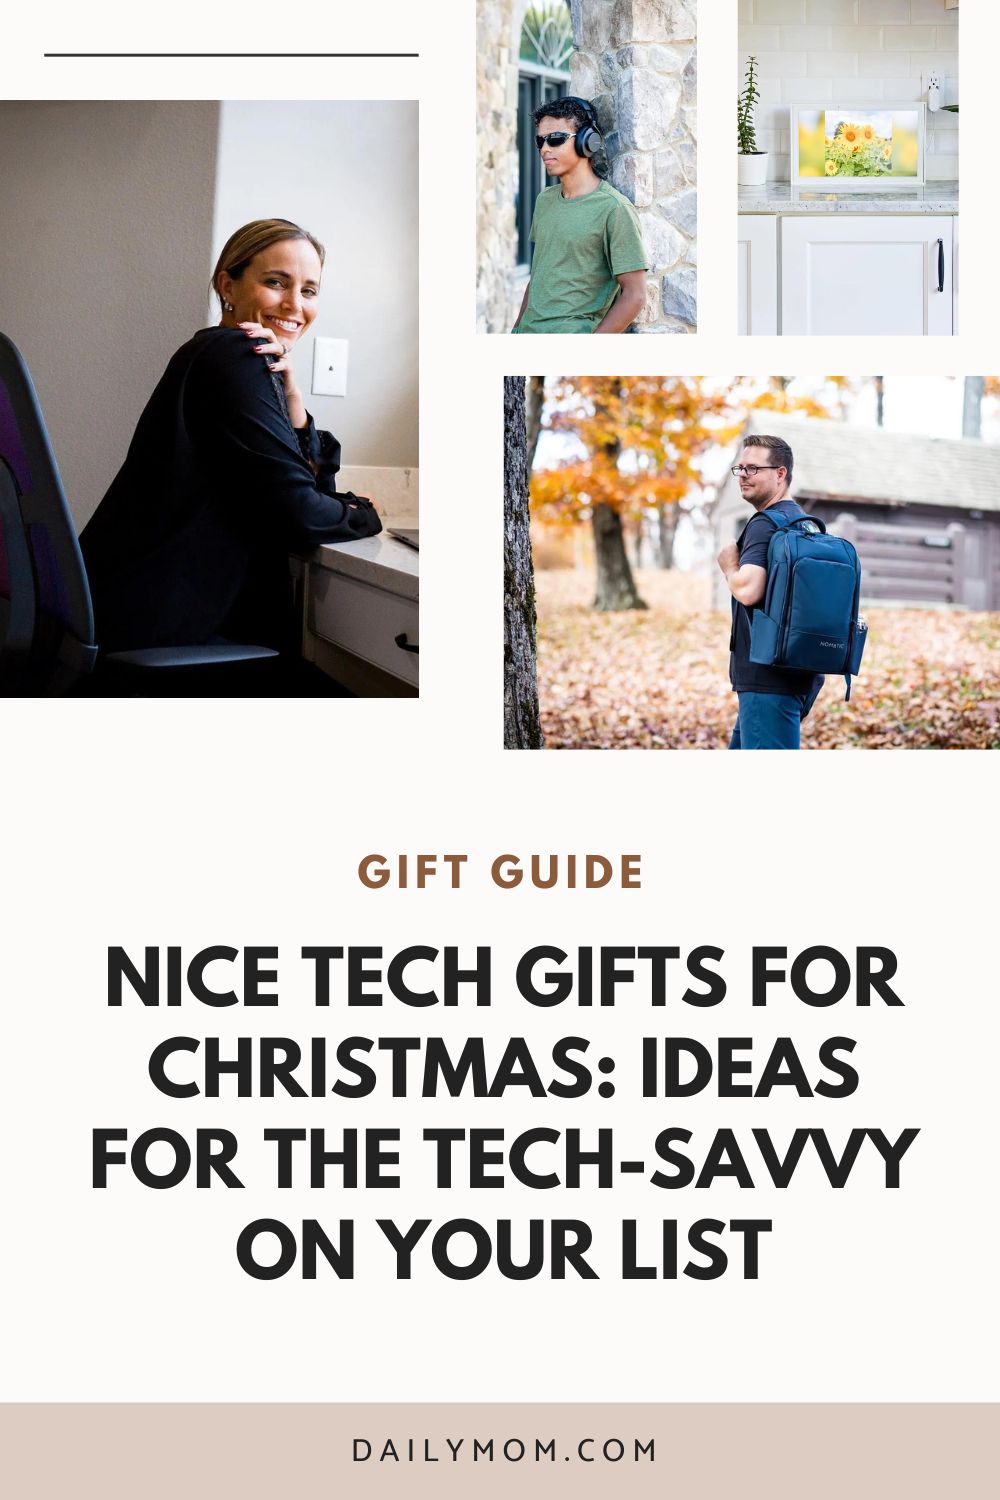 12 Nice Tech Gifts For Christmas: Ideas For The Tech-Savvy On Your List 31 Daily Mom, Magazine For Families